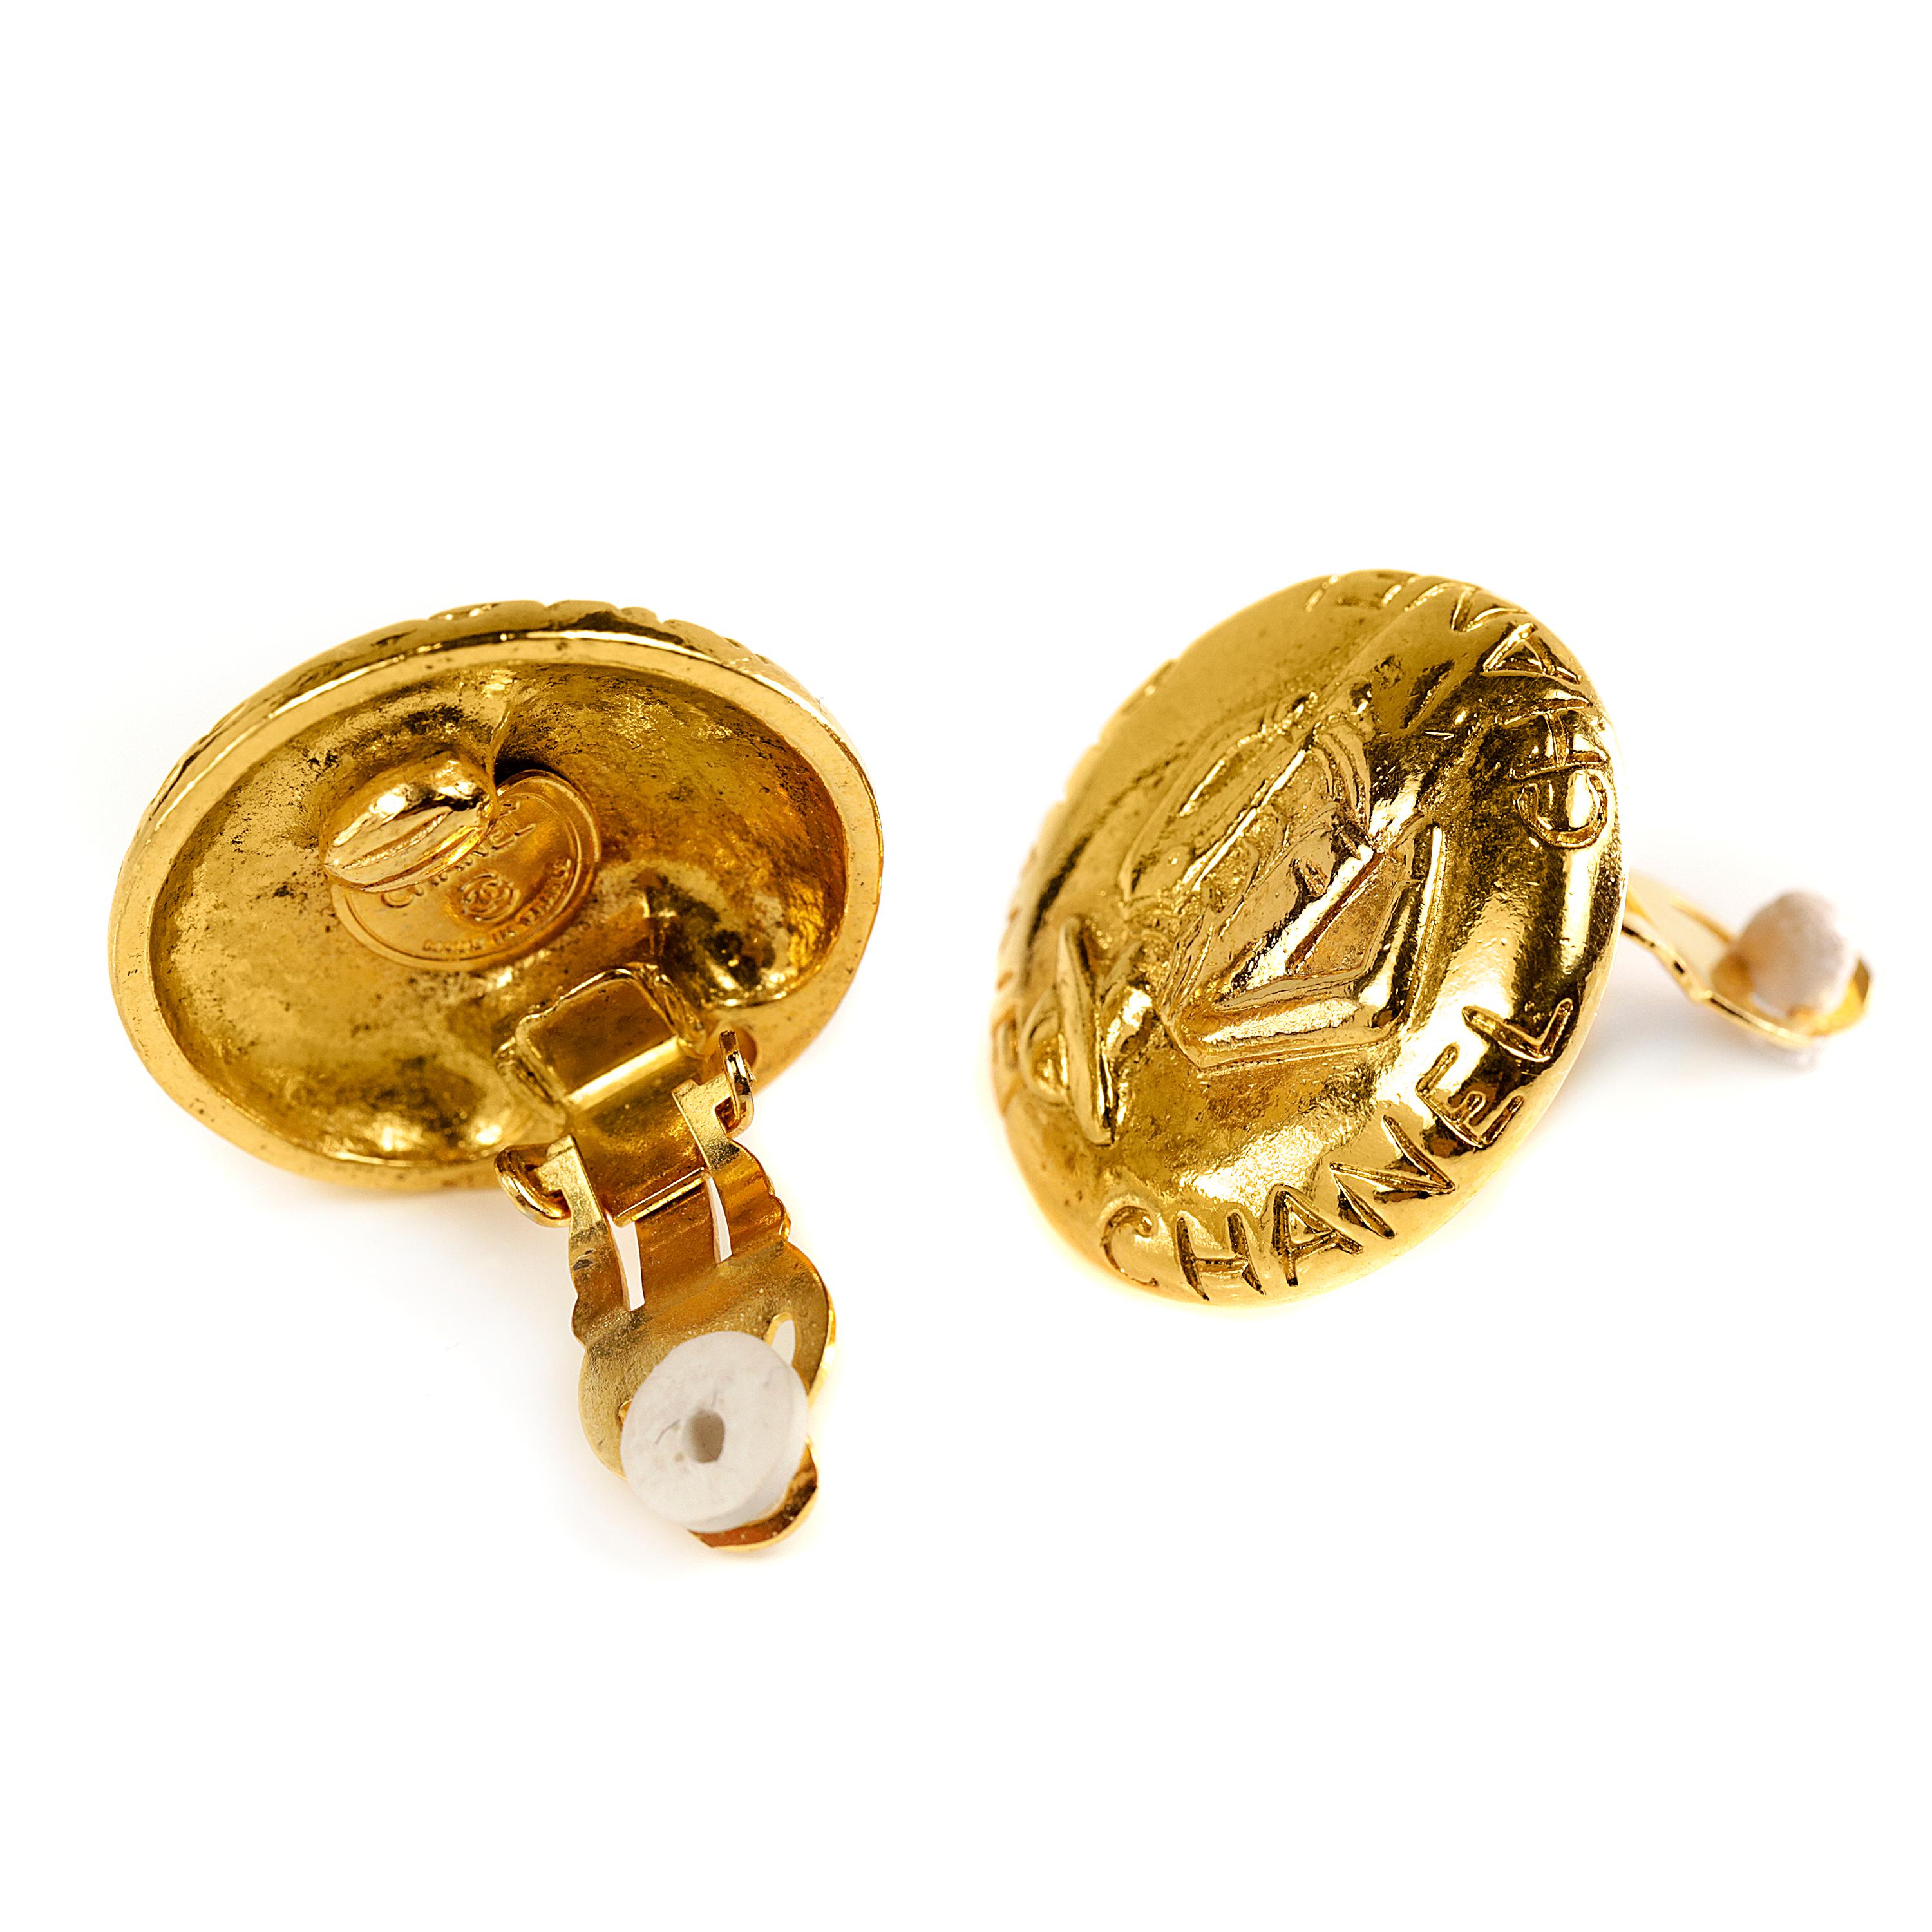 These authentic Chanel Gold Coco Round Earrings are in excellent vintage condition from the late 1970's- early 1980's.    Circular gold button style earrings feature Coco’s elegant silhouette etched in the center.  Clip on style.  Made in France. 